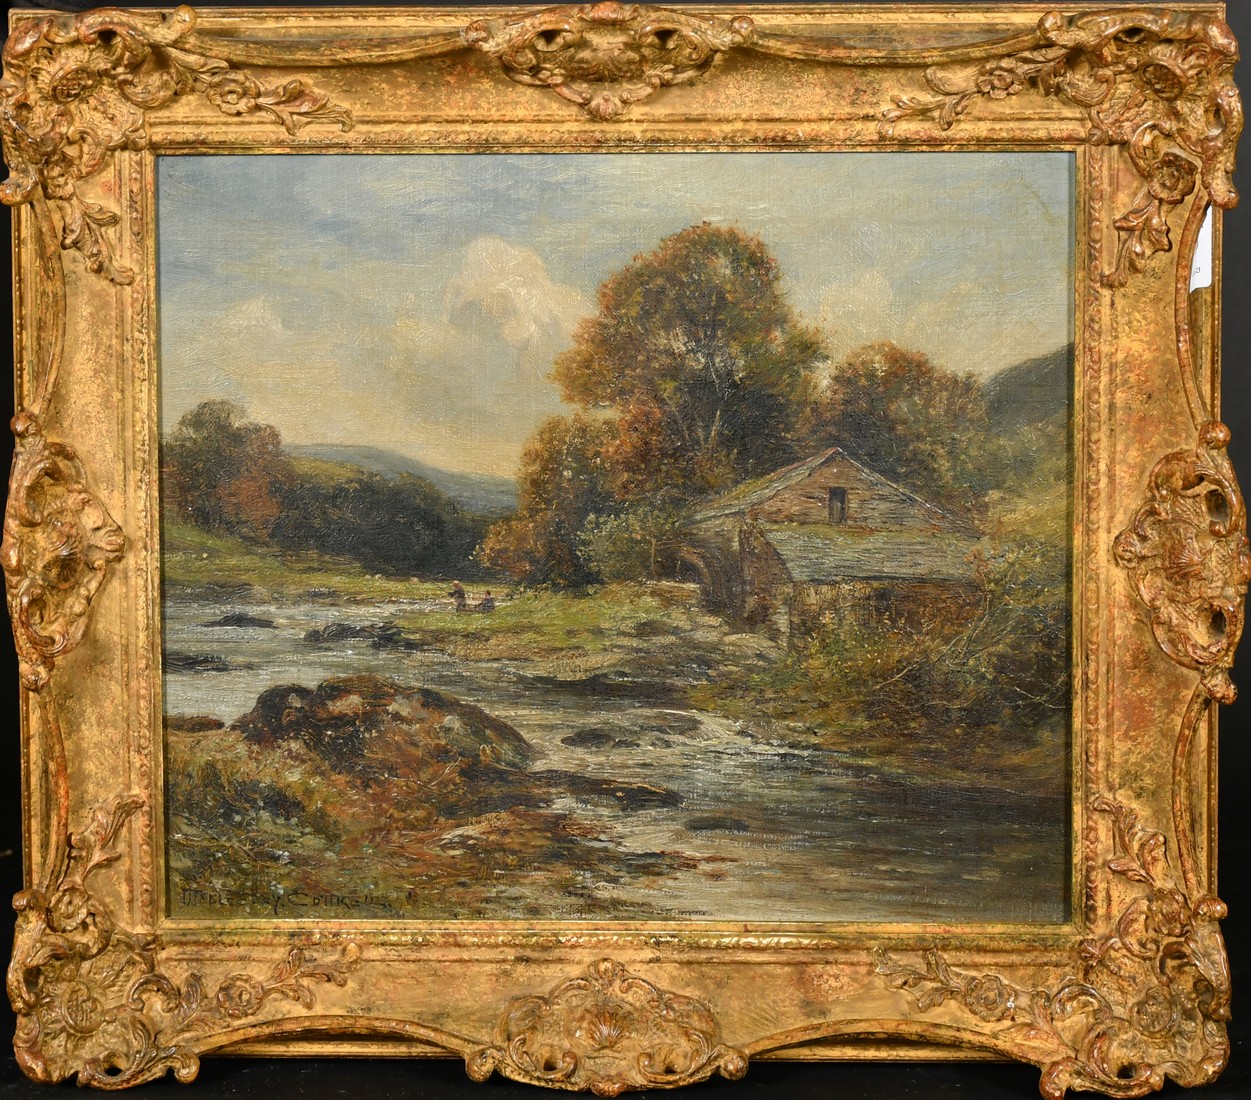 Arthur Wellesley Cottrell, circa 1898, 'An Old Mill, North Wales', anglers by a river, oil on canvas - Image 2 of 4